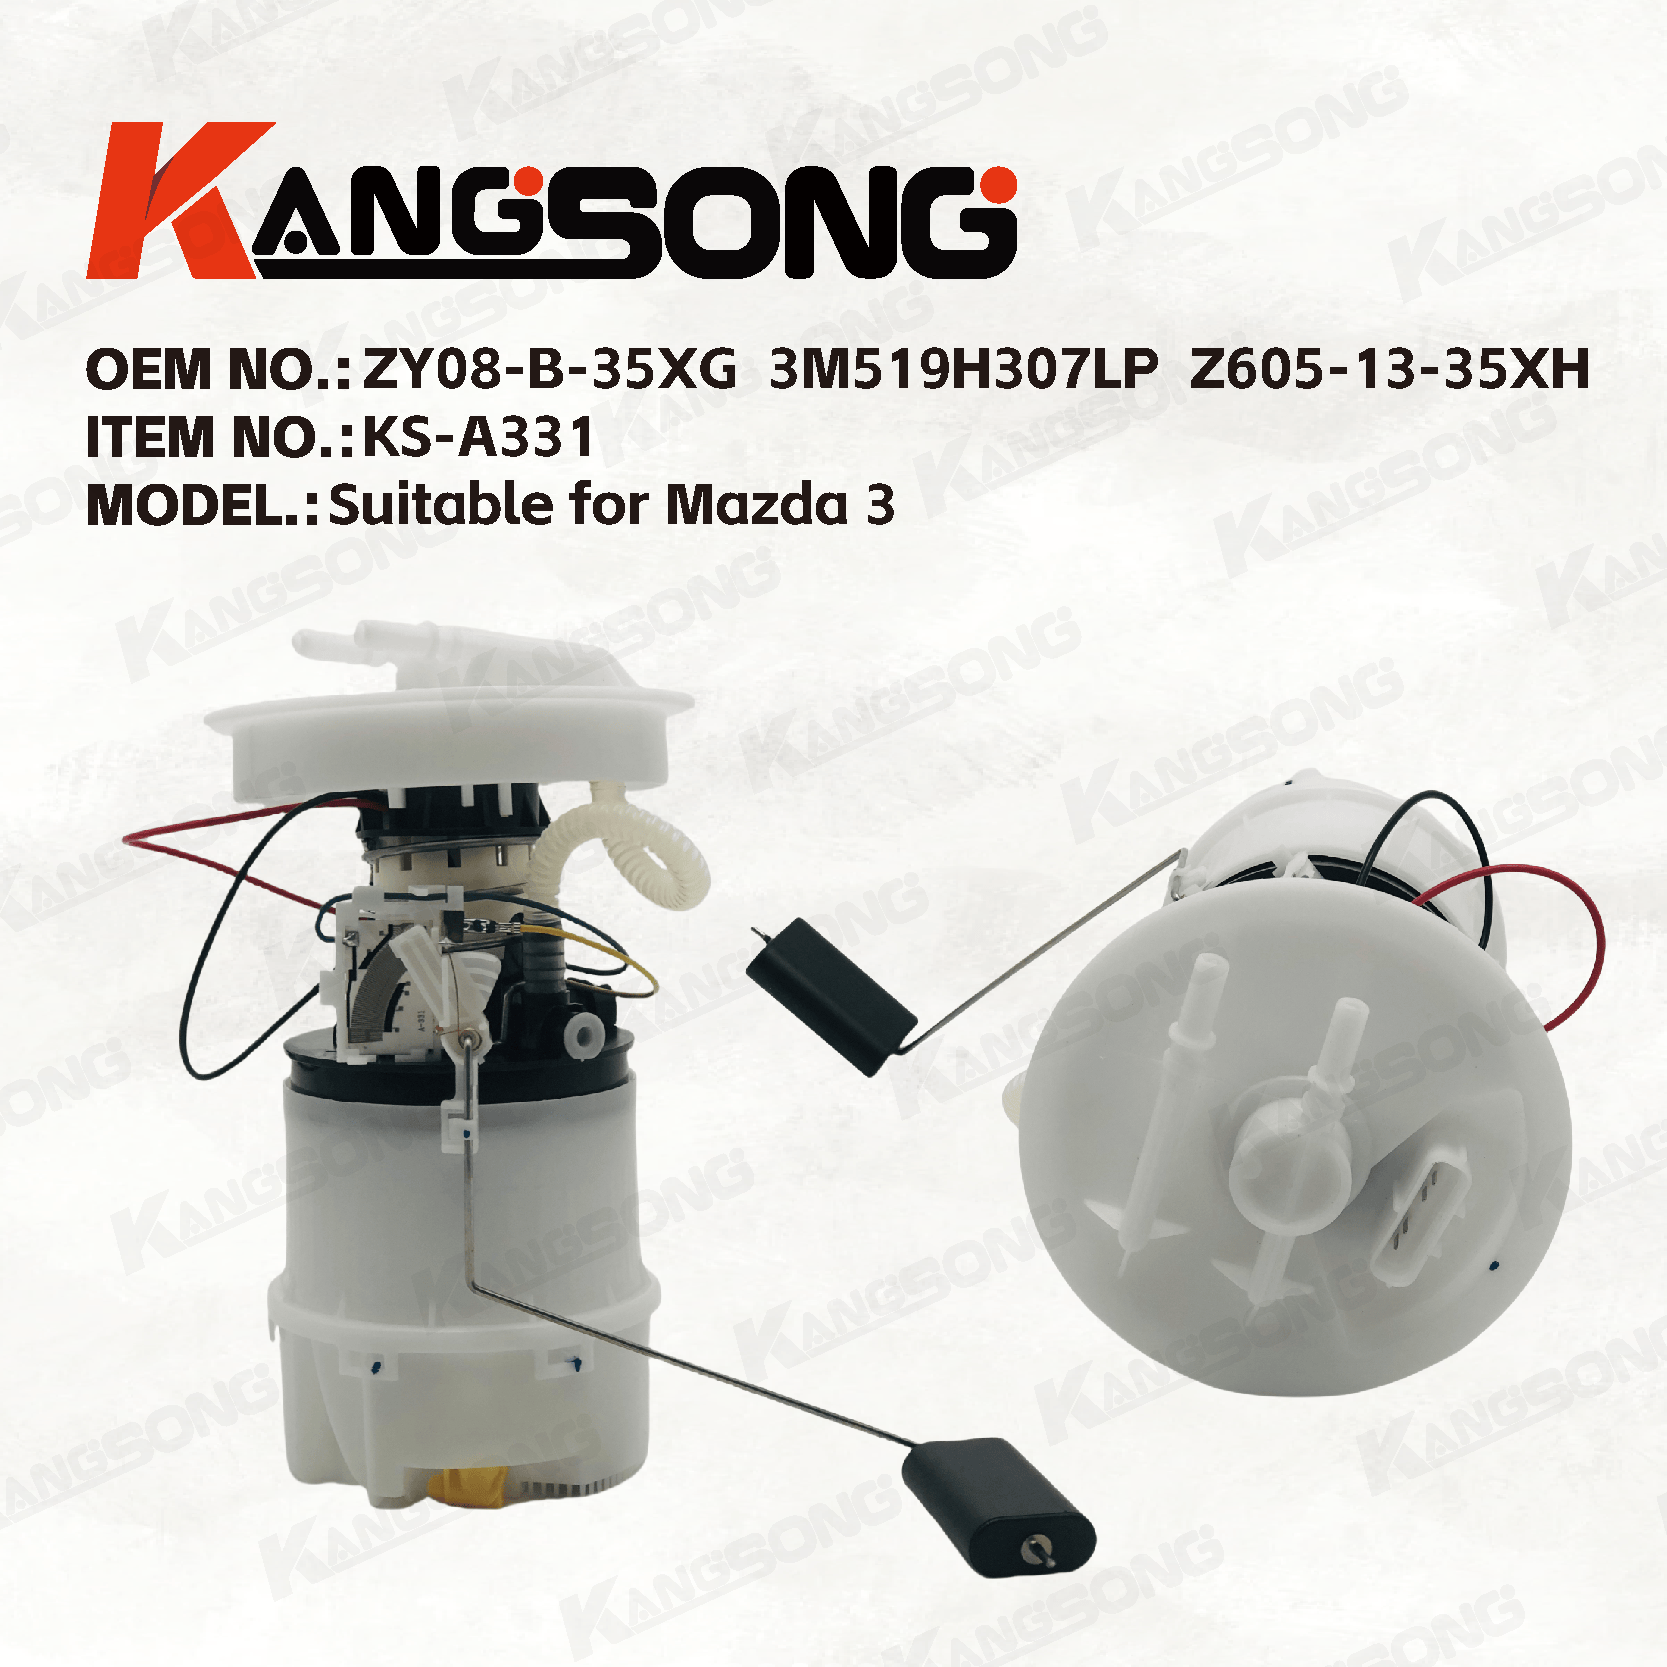 Applicable to Mazda 3/5M519H307  1602781  3M519H307/Fuel pump assembly/KS-A331